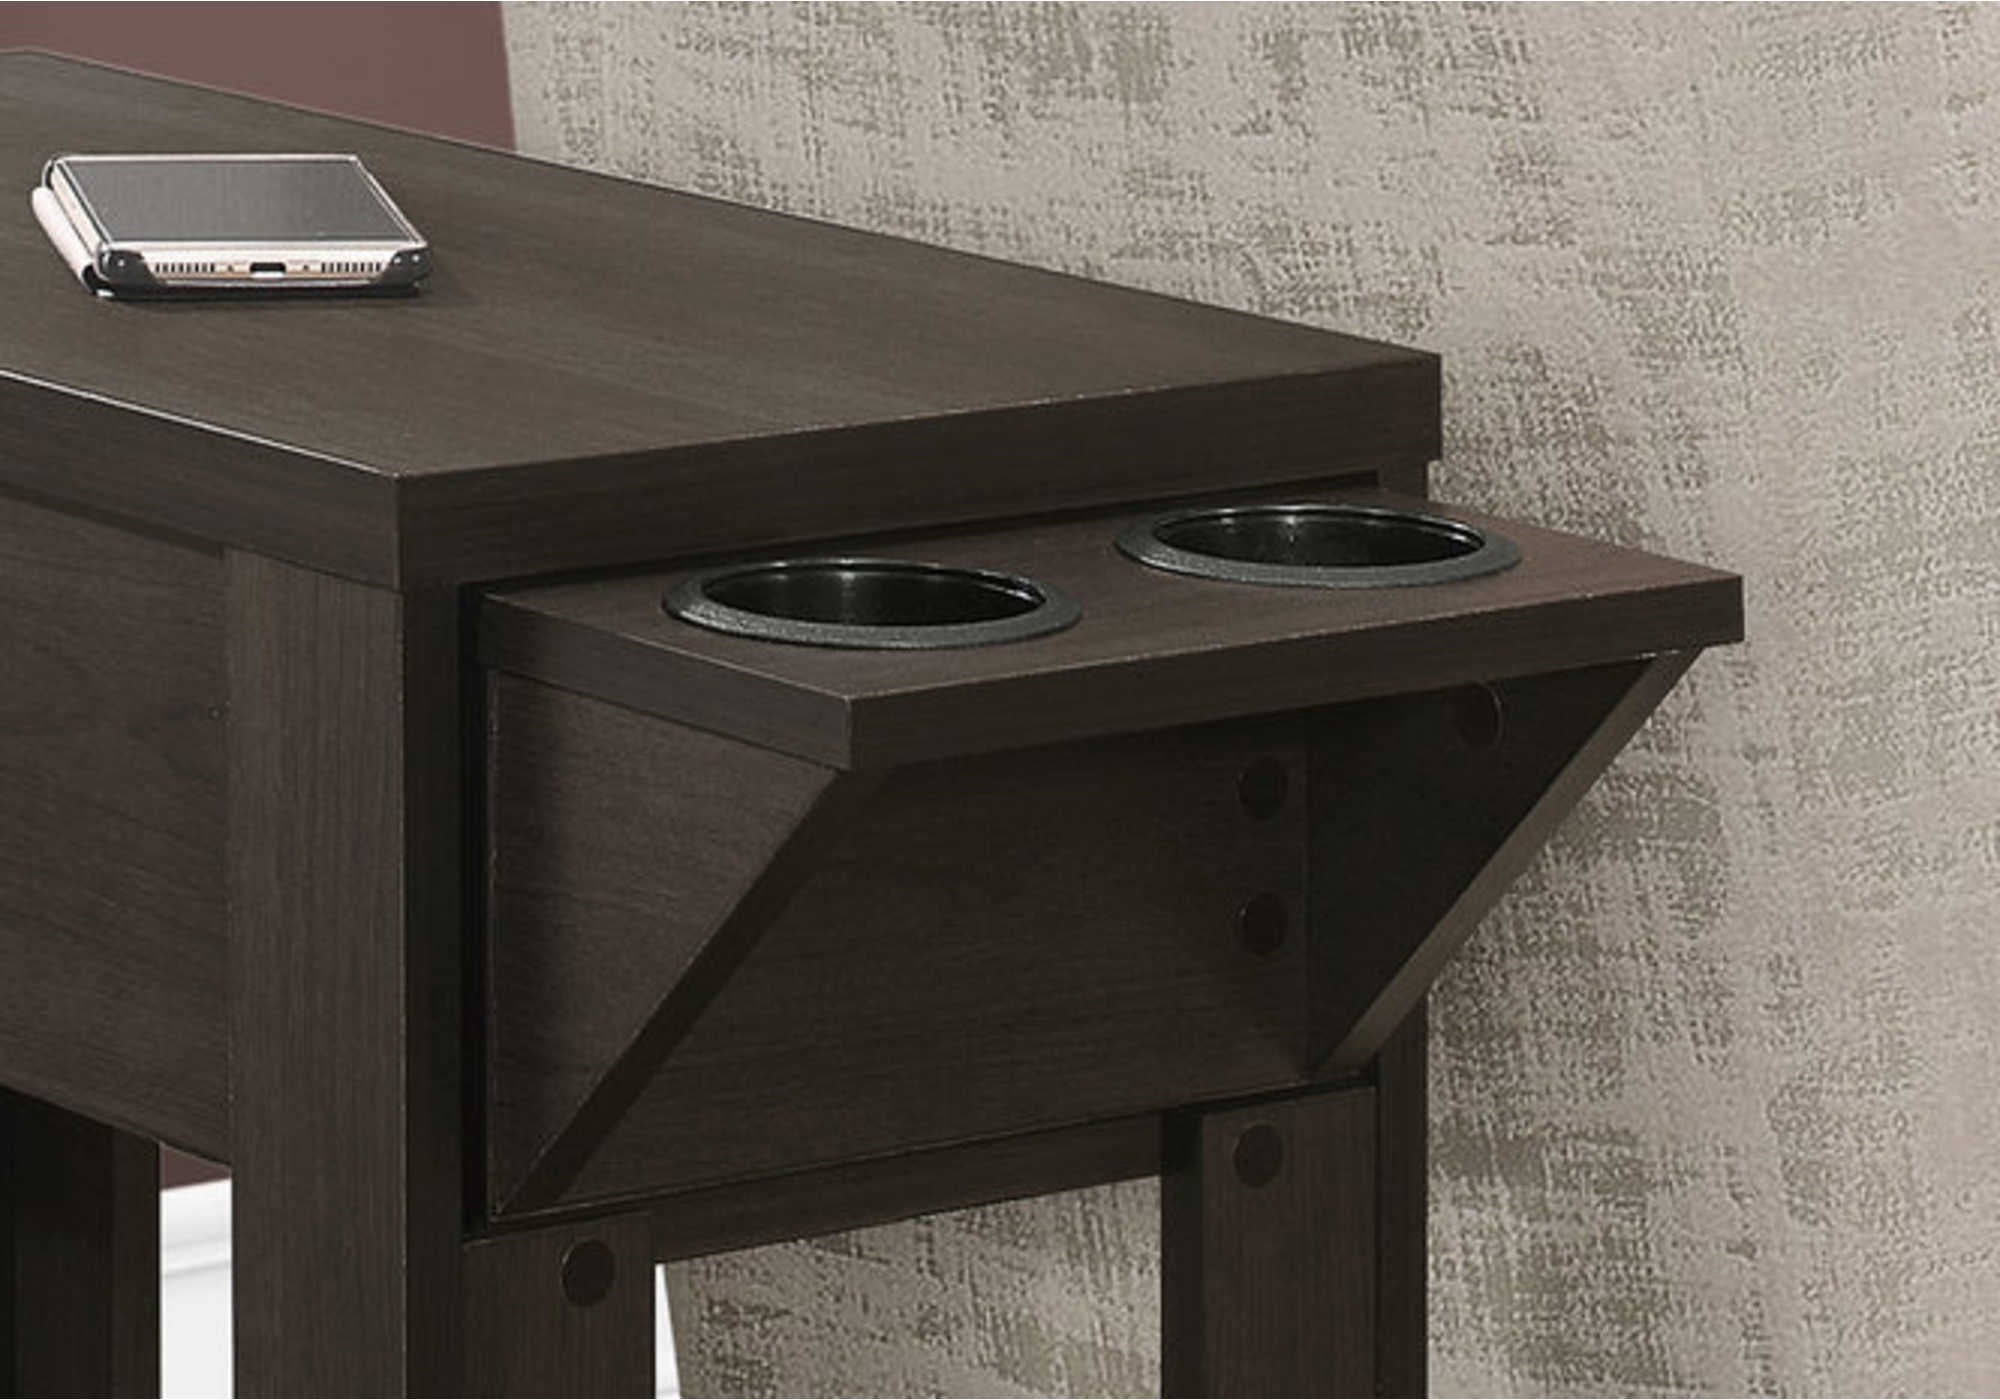 ACCENT TABLE - 23"H / ESPRESSO WITH A GLASS HOLDER